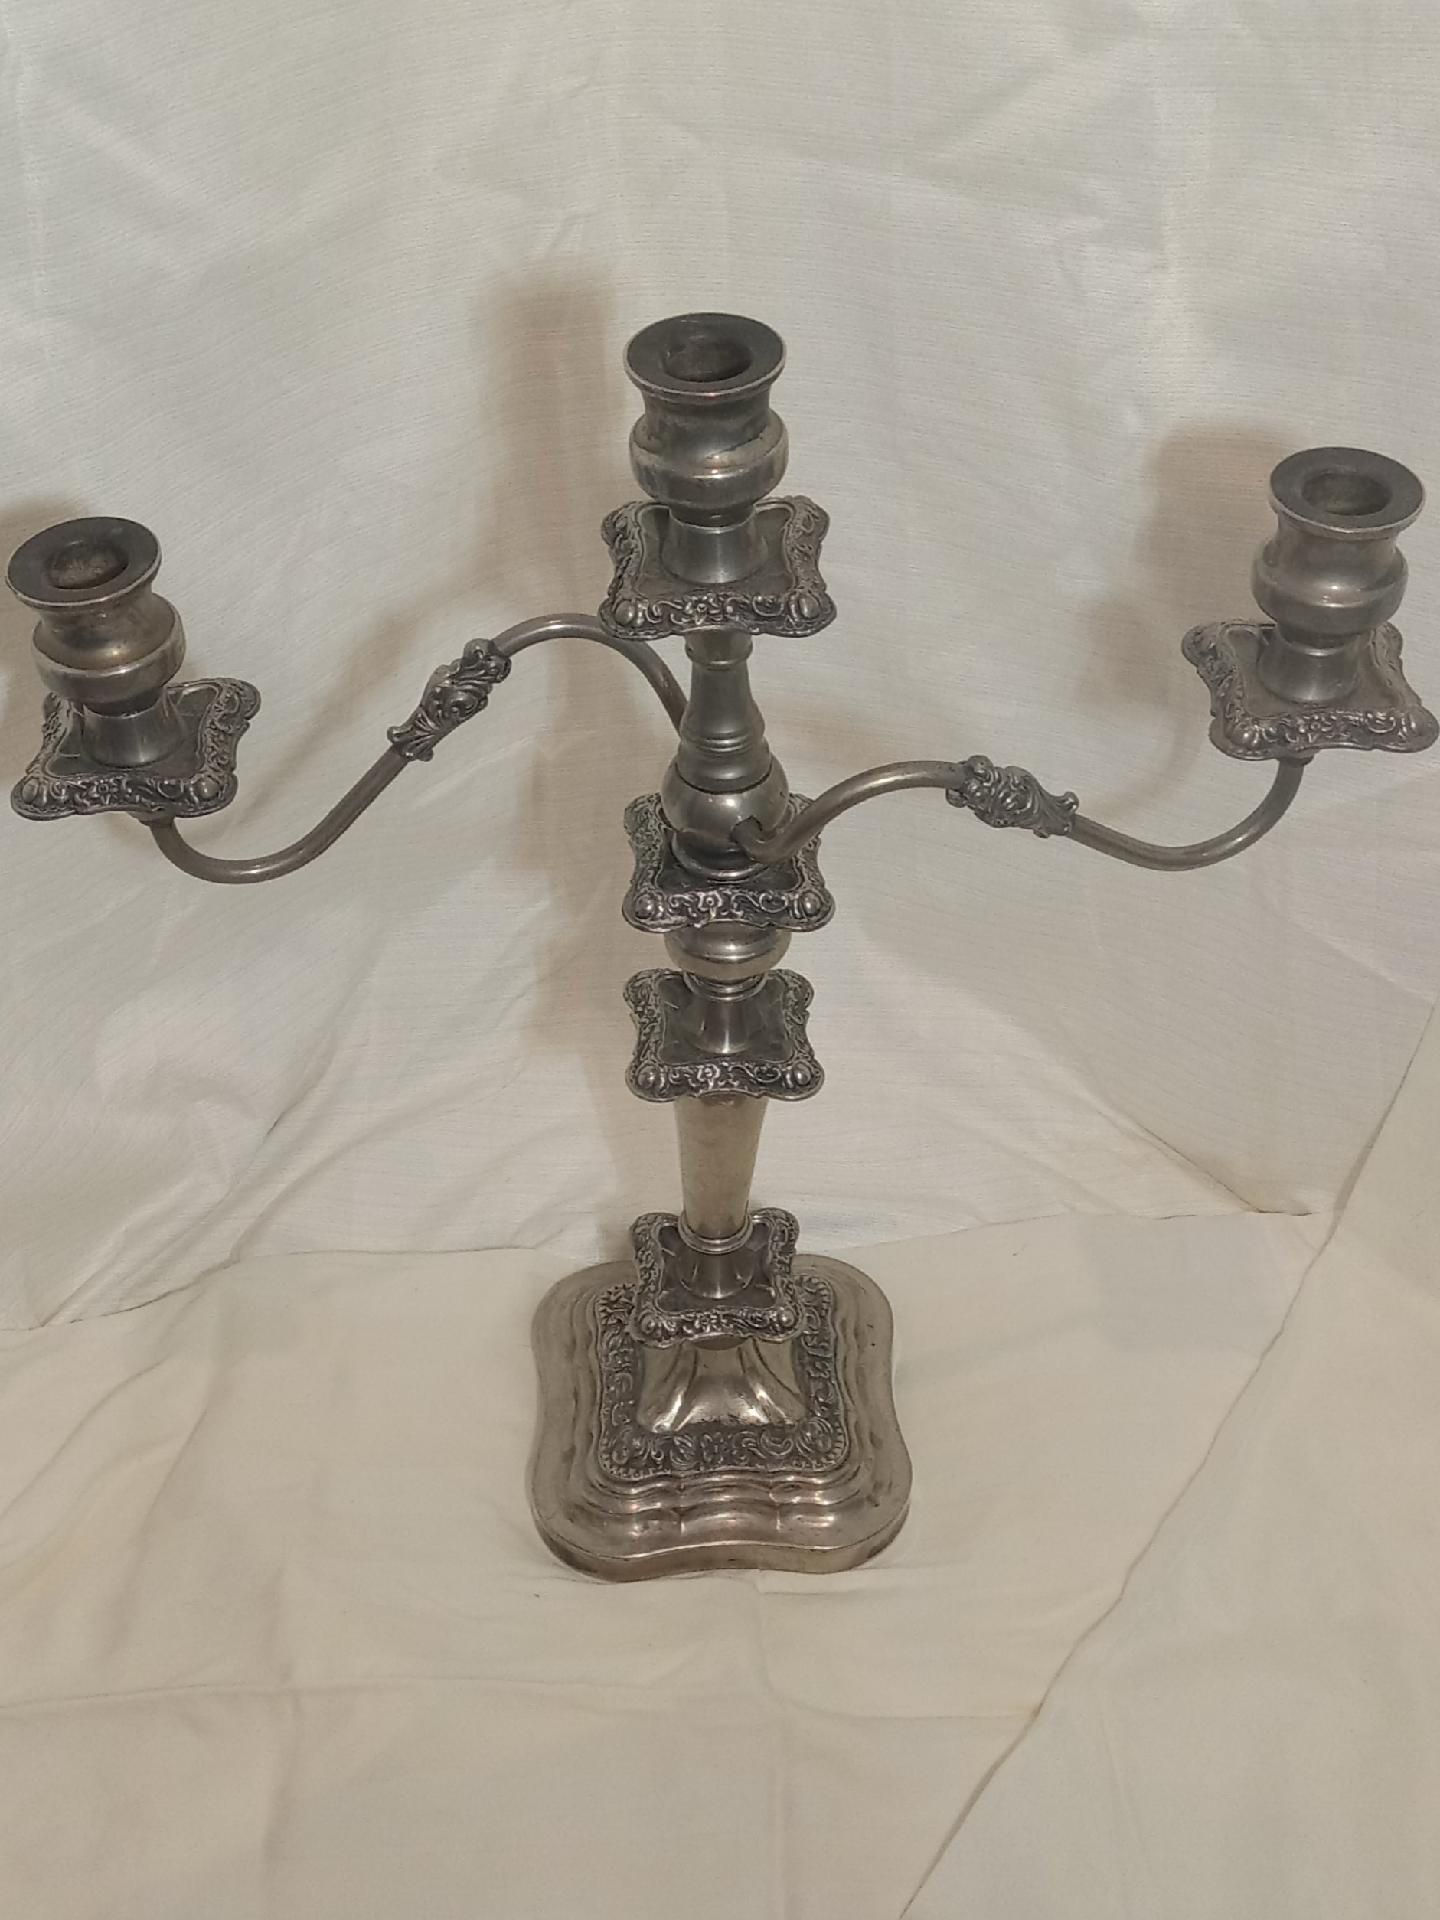 Antique Silver Plated Candelabras by Goldfeder Silverware Company (pickup in NOLA only) $400 OBO